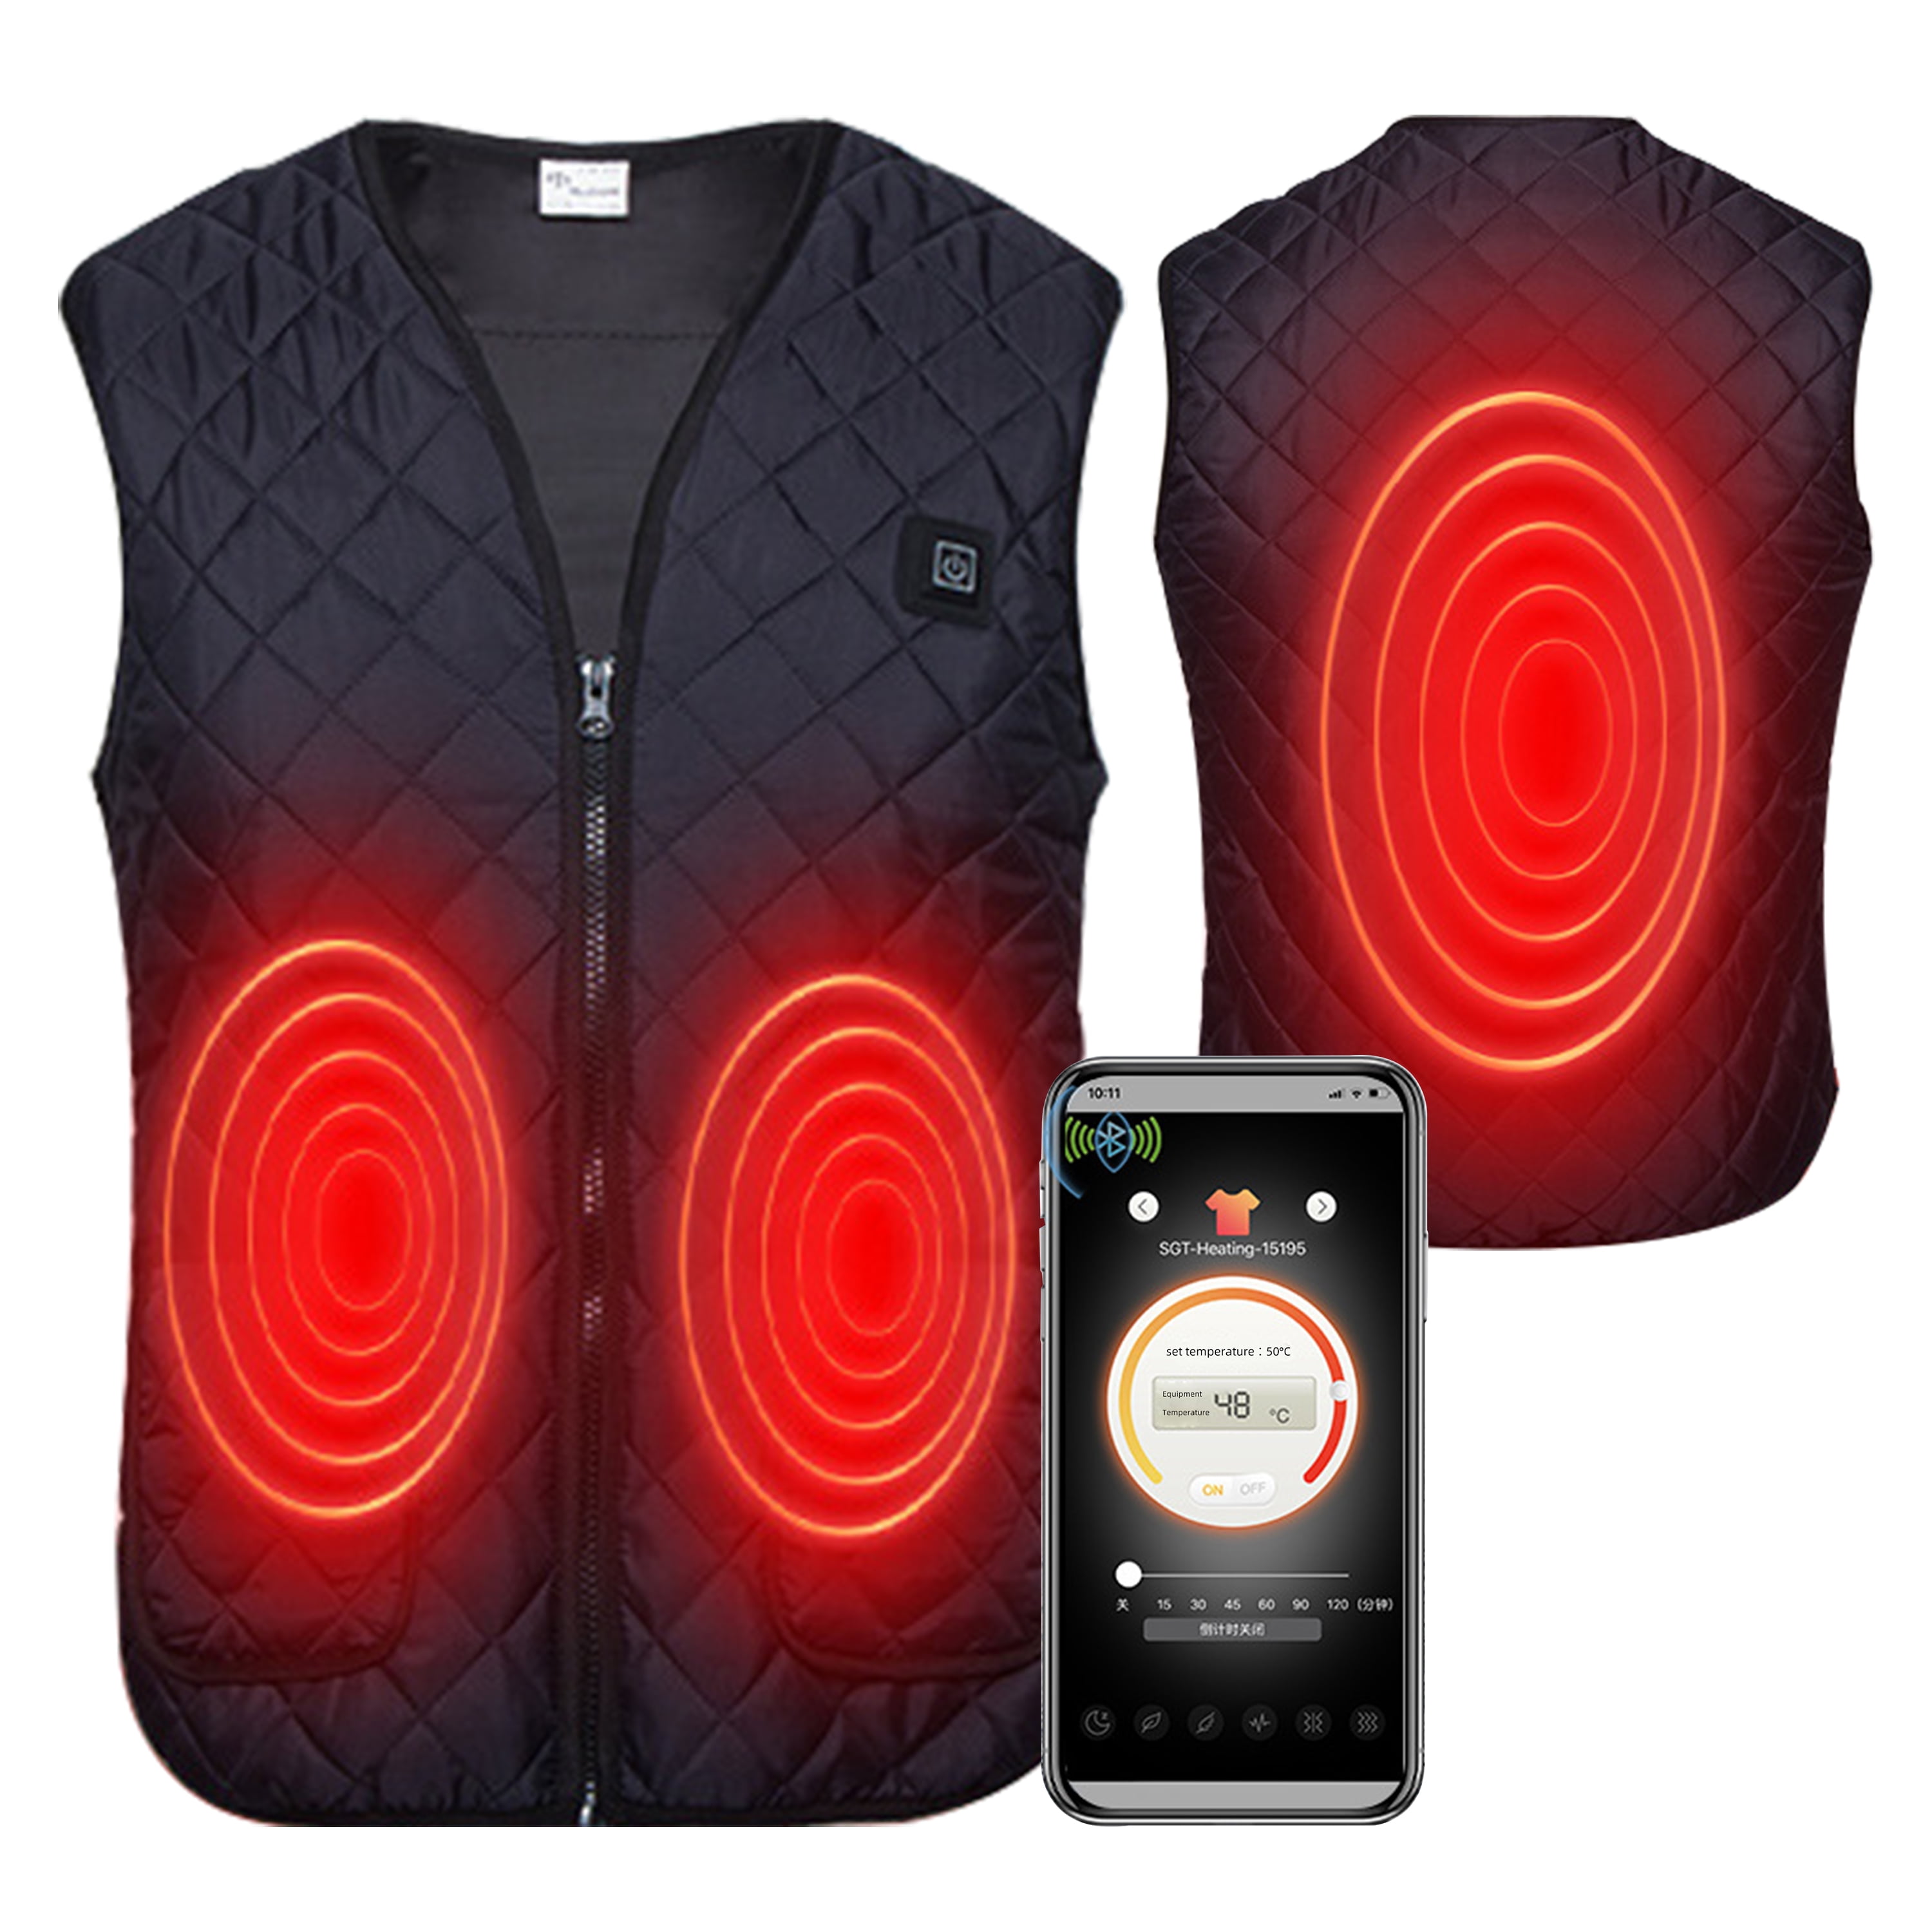 Smart Bluetooth Heated Vest , Unisex Heated Clothing for men women,  Lightweight USB Electric Heated Jacket APP Control with 5 Heating Levels, 3